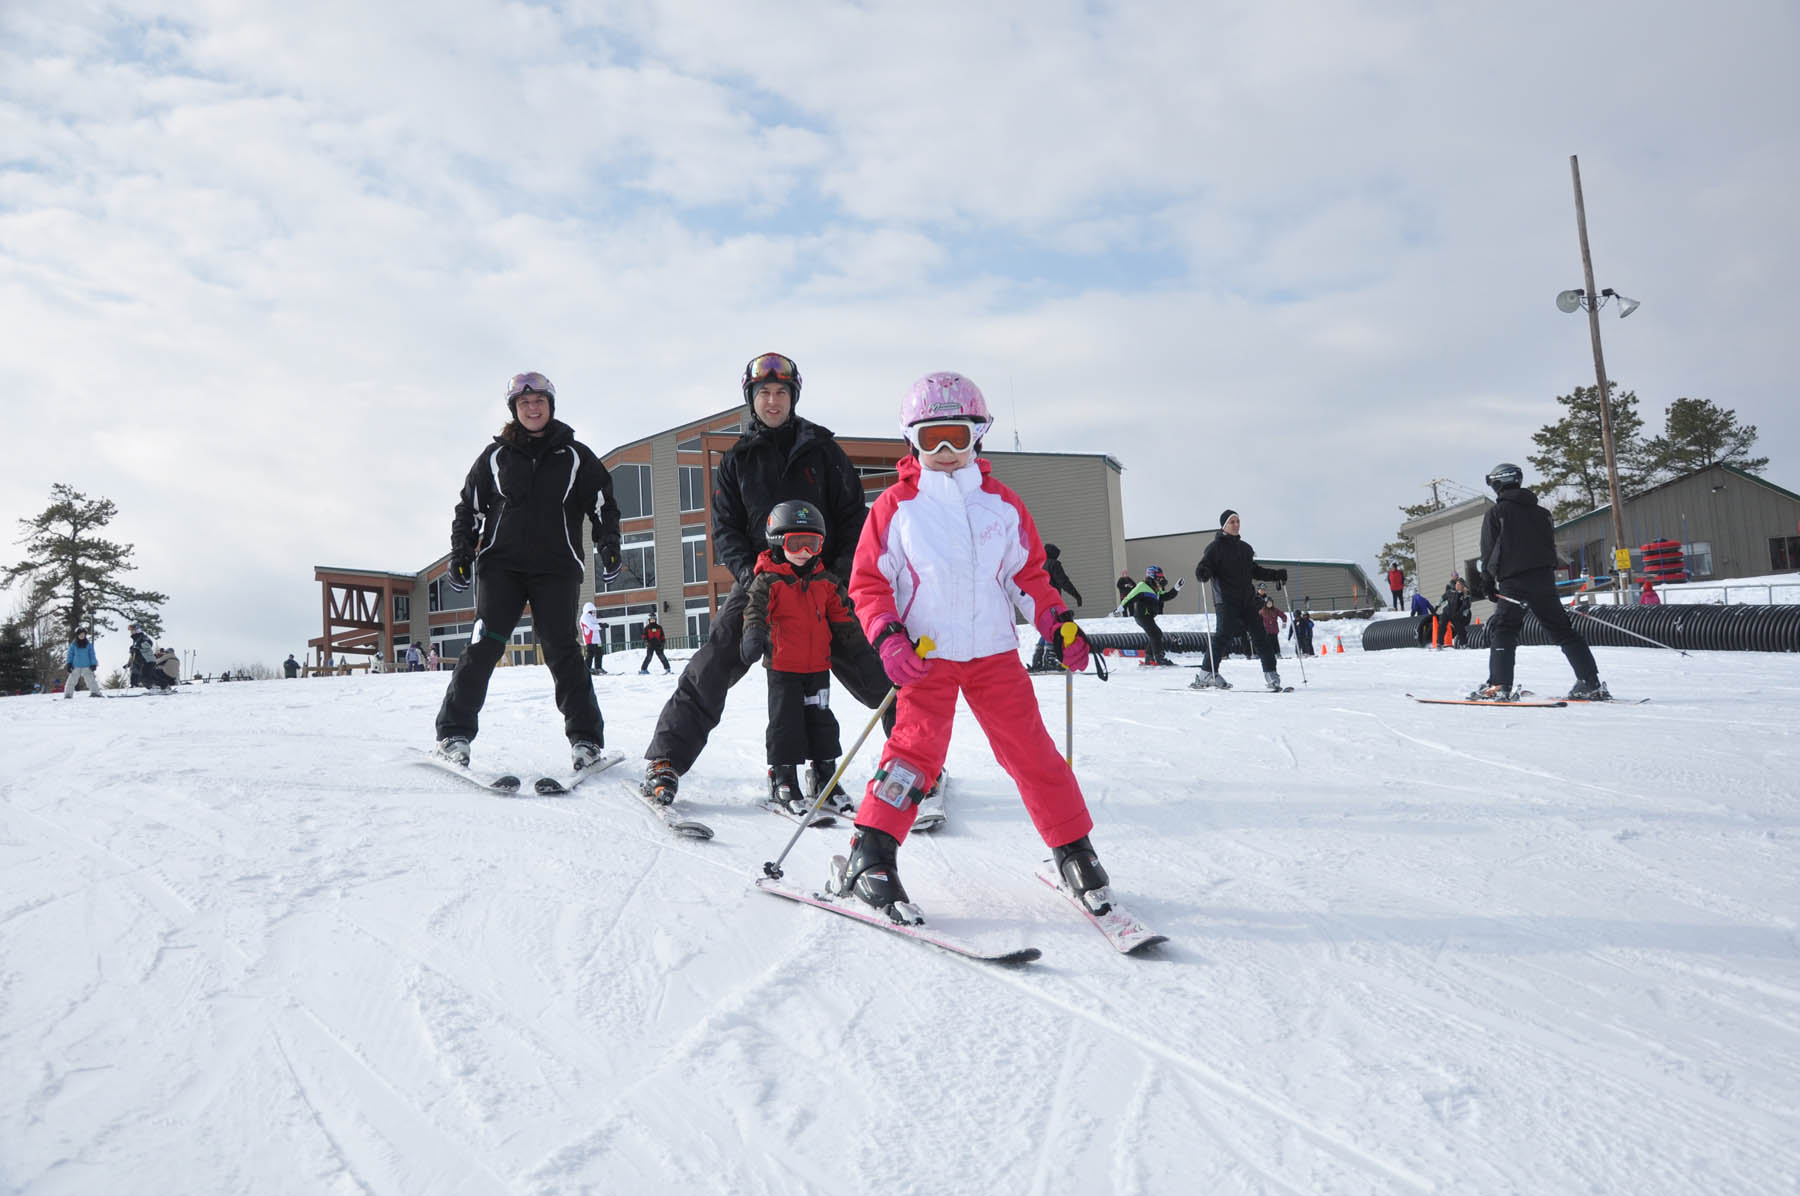 Parents and young children on skis.